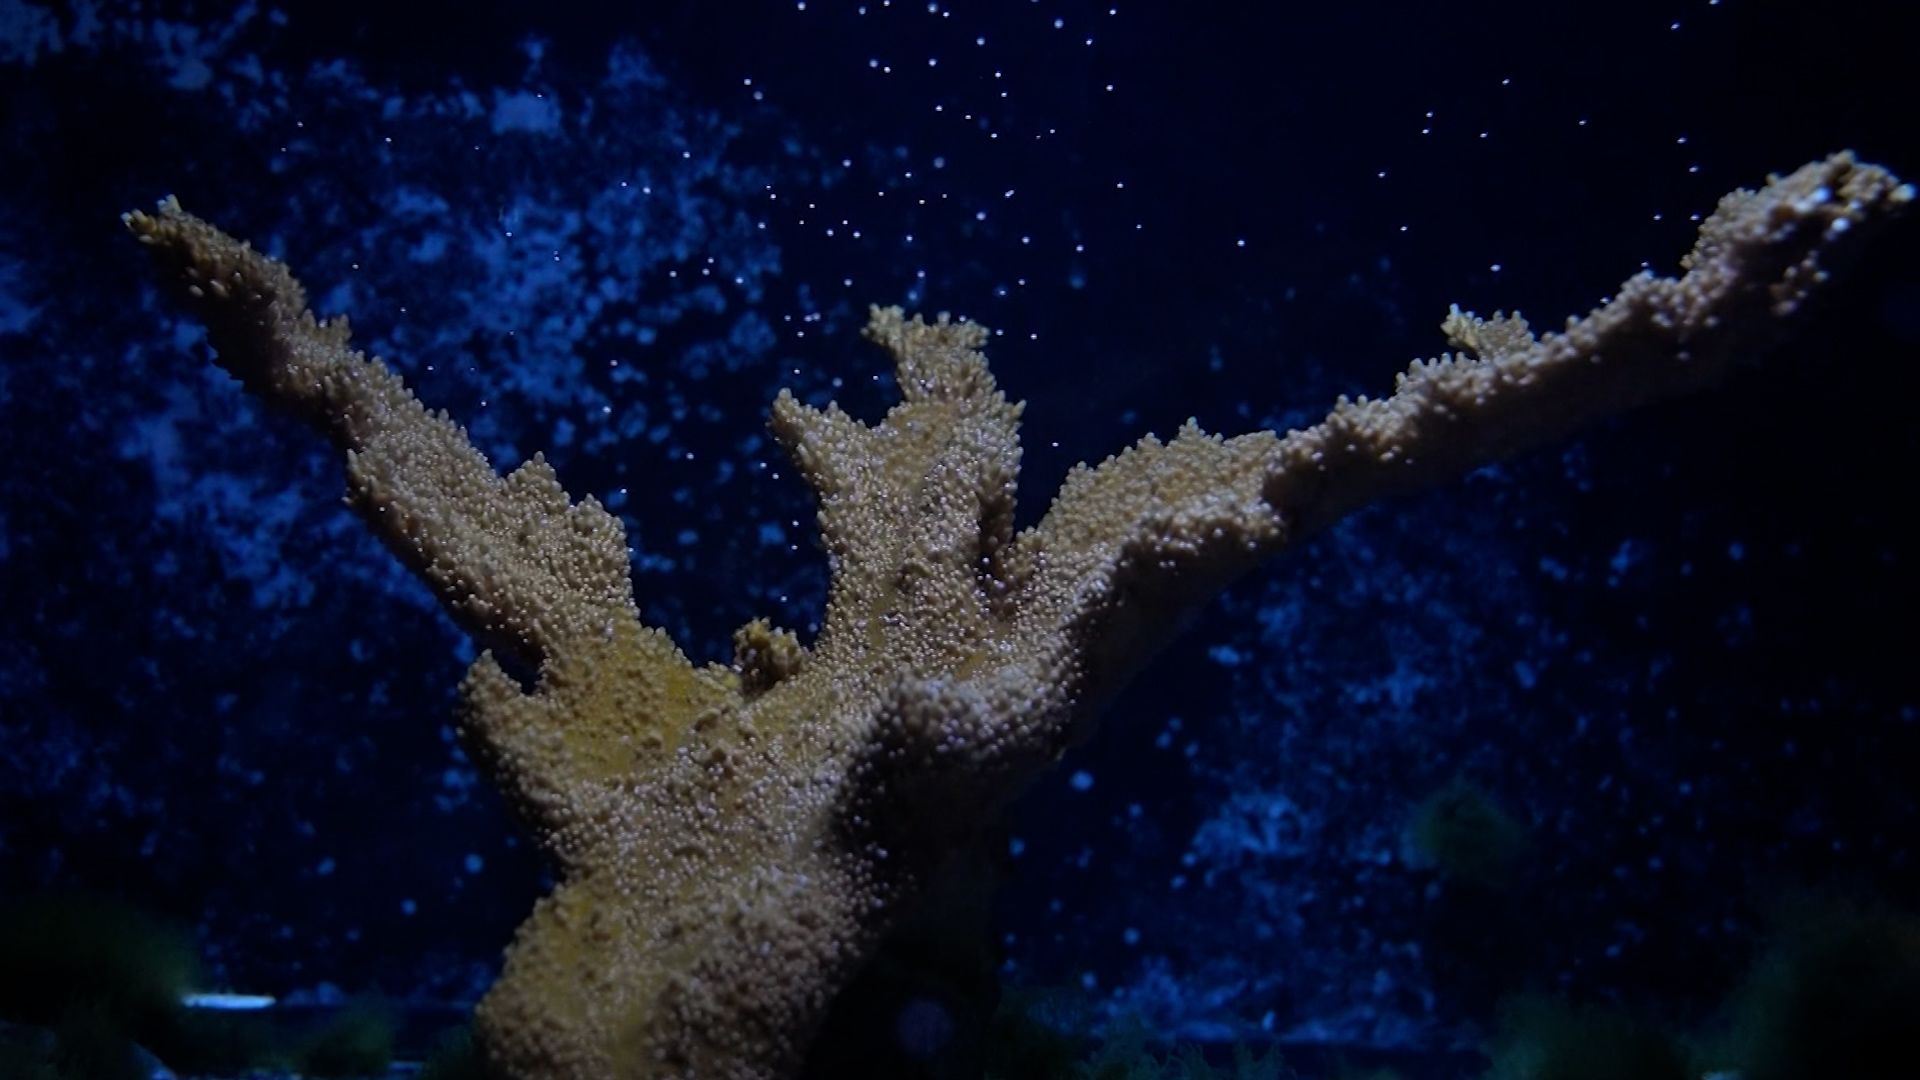 Fields of Caribbean staghorn corals discovered off Florida coast, Reef  Builders